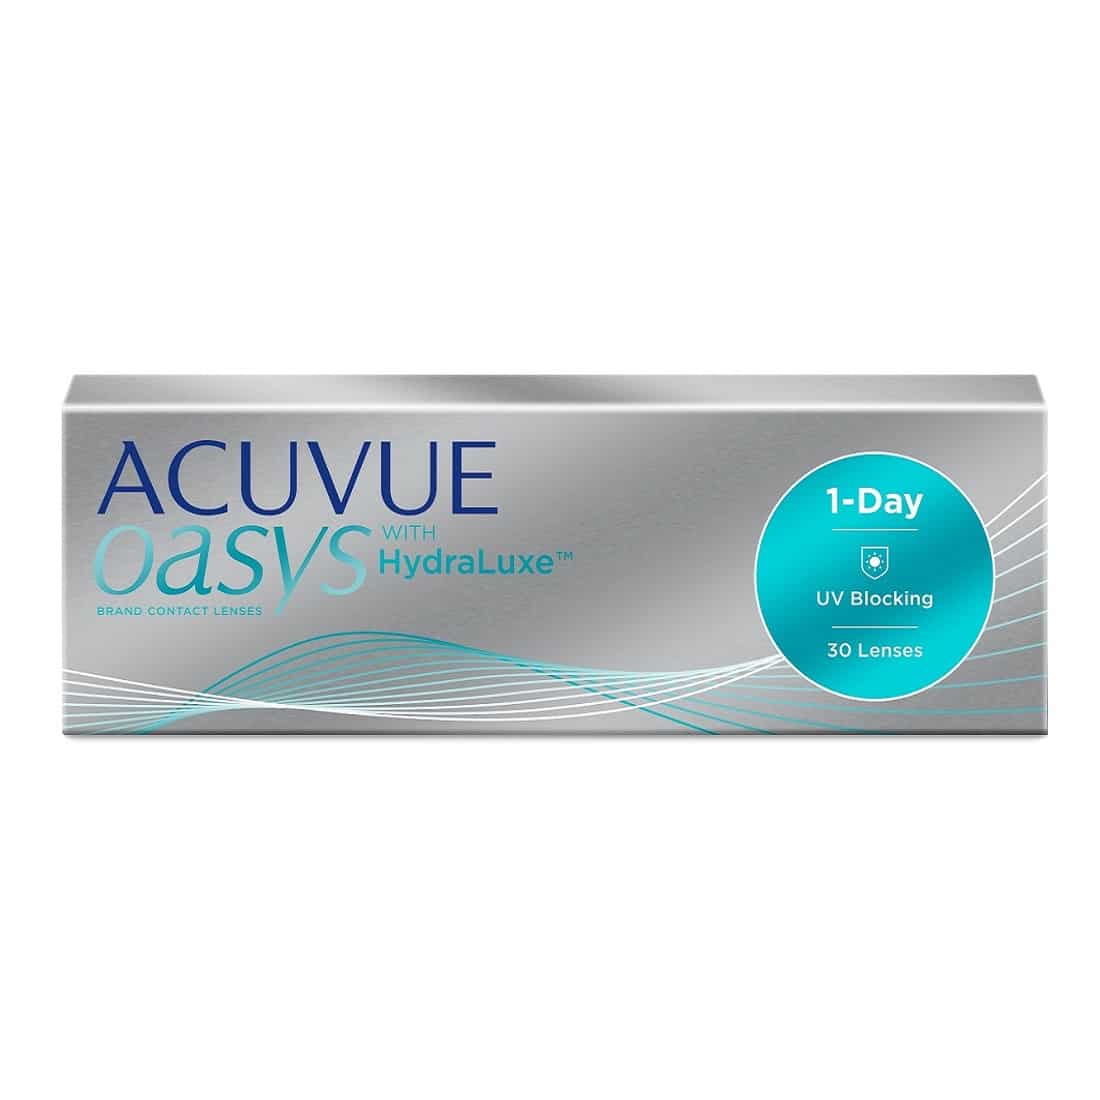 acuvue-oasys-1-day-for-patients-who-demand-high-performance-lenses